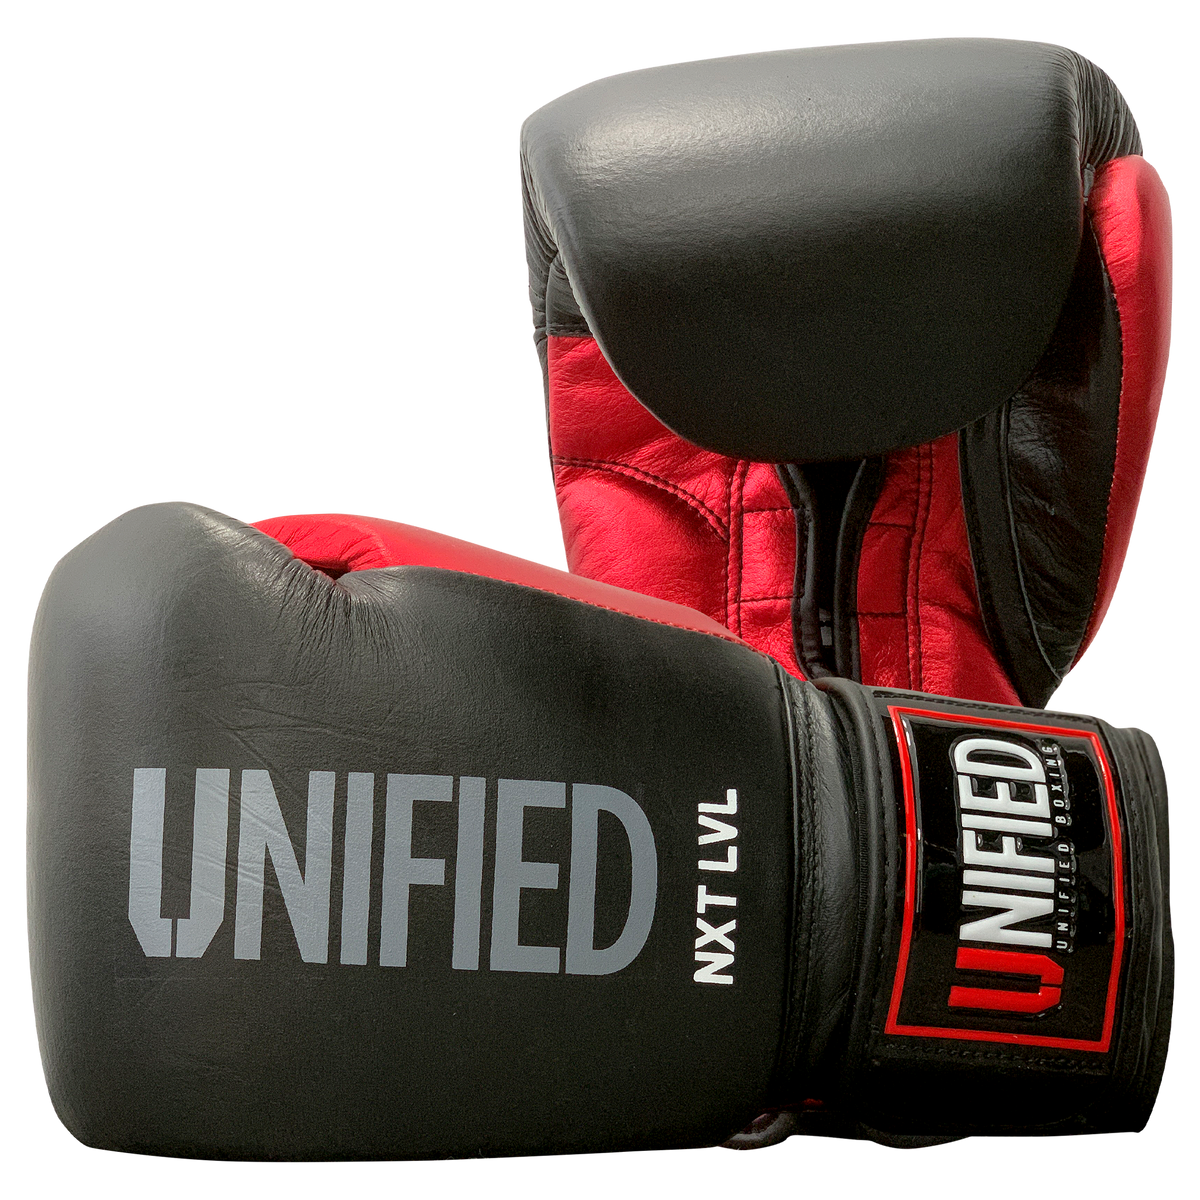 Unified Boxing Gloves | Boxing Gloves | Sparring Gloves | Professional Standard